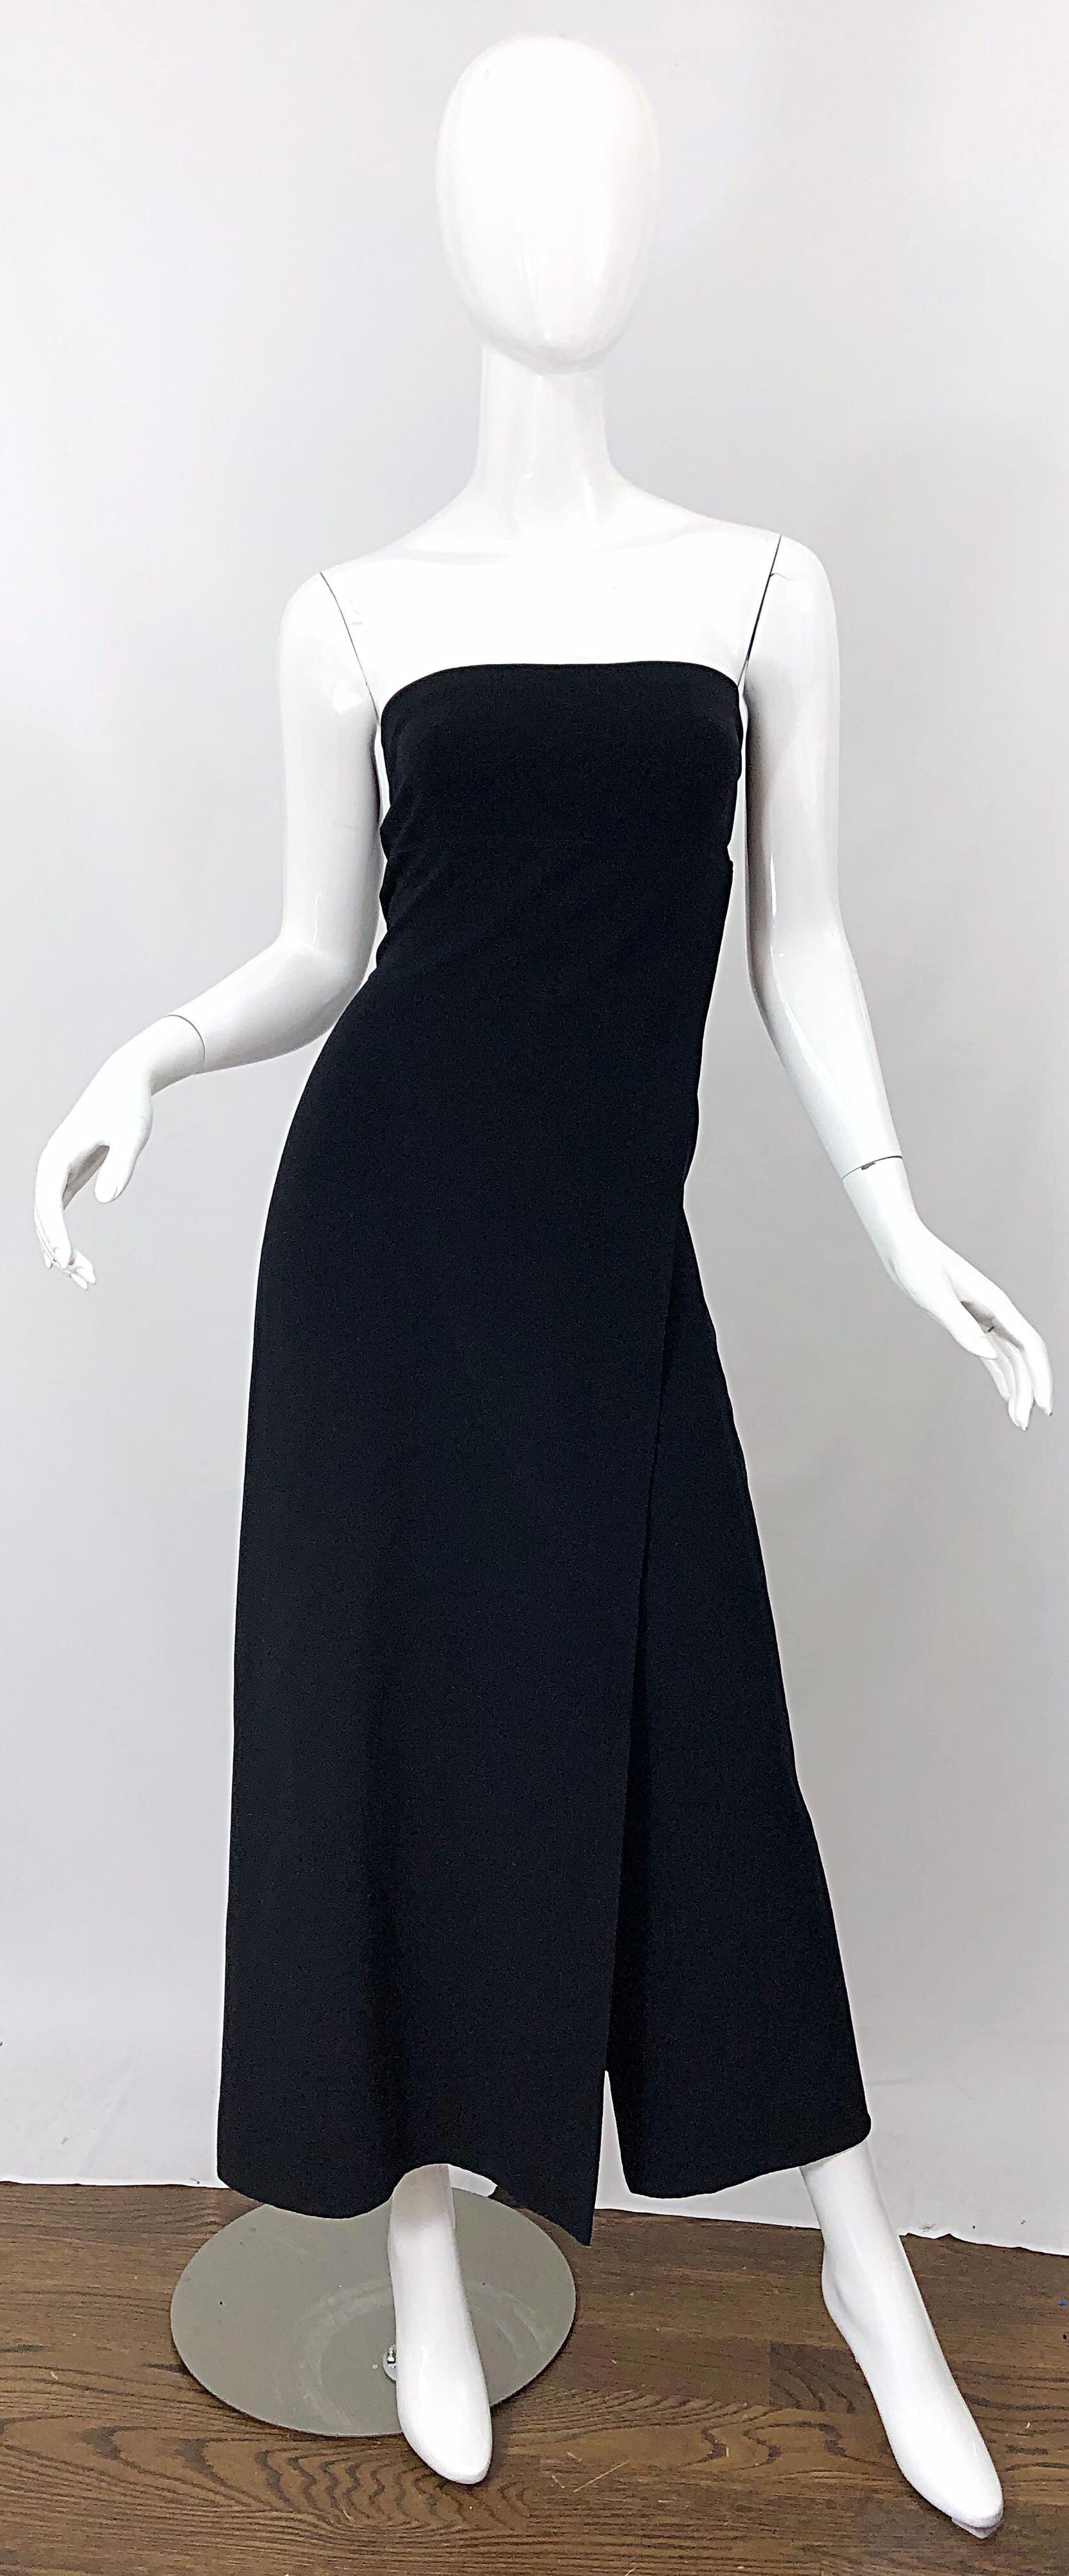 Elegant 1990s DONNA KARAN NEW YORK black strapless vintage wool gown! Features a soft wool blend (96%), with just the right amount of spandex (4%) to comfortably stretch to fit. The criss-cross slit at the center hem almost gives off the illusion of